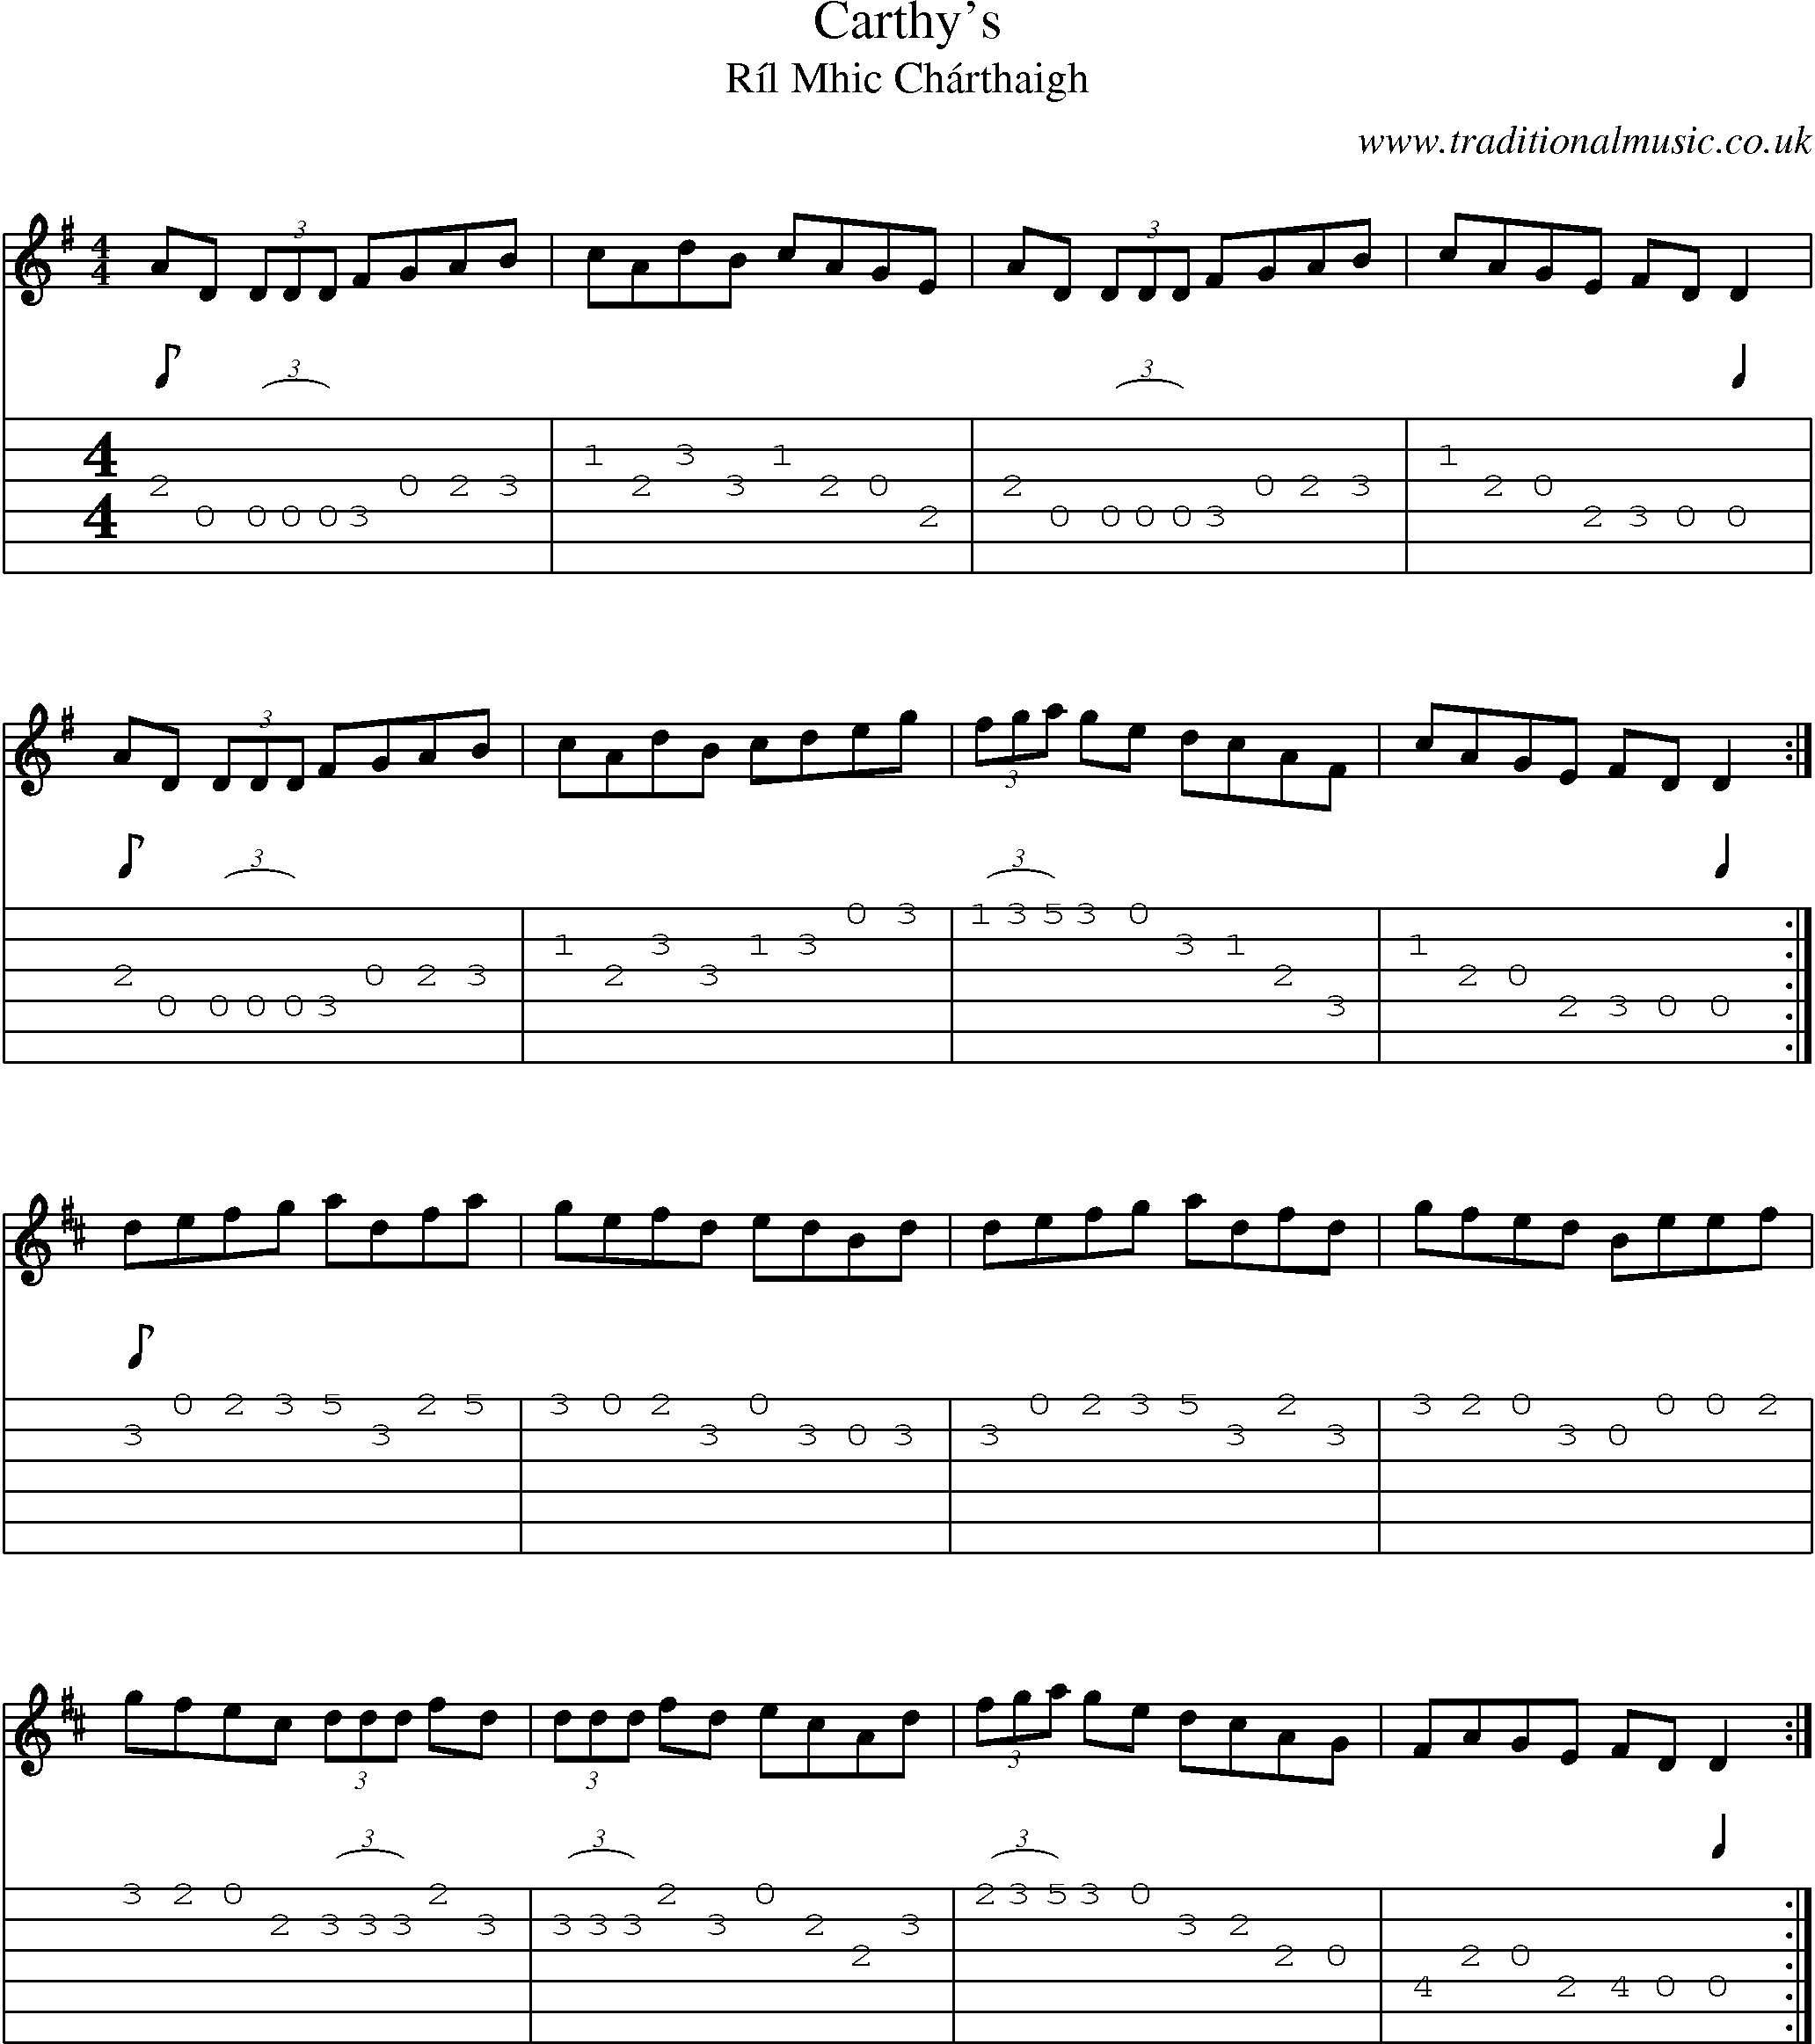 Music Score and Guitar Tabs for Carthys